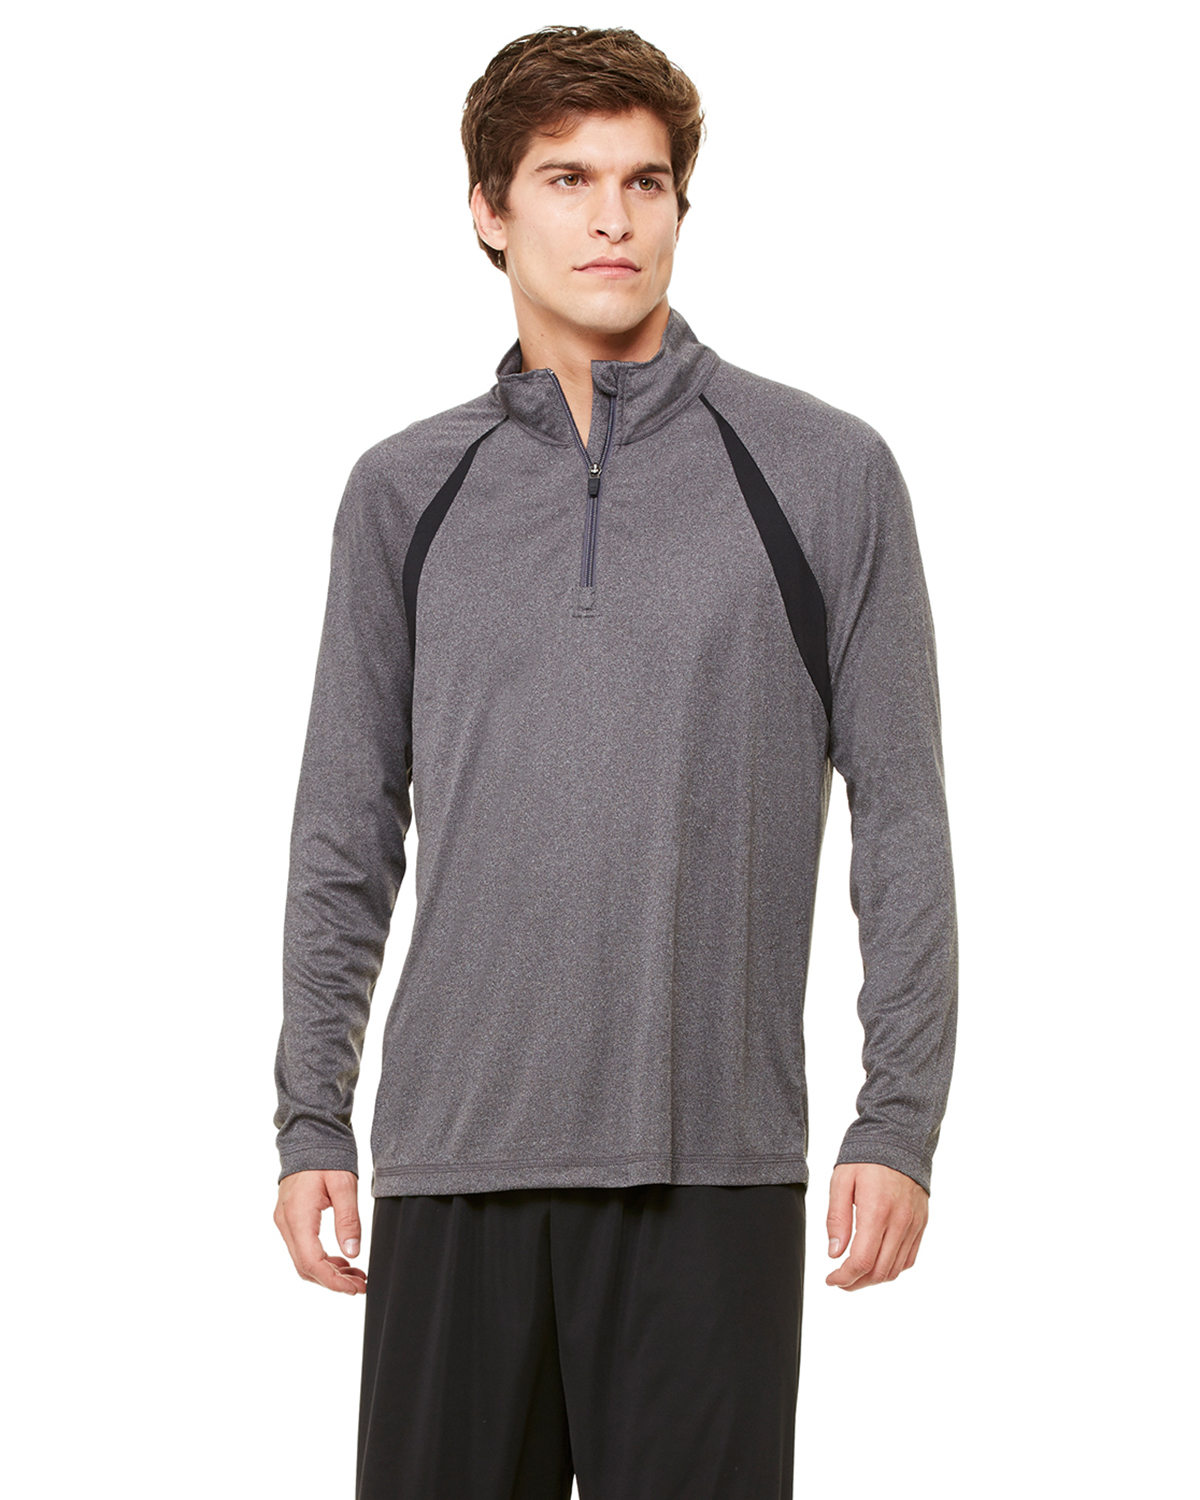 Alo Sport M3026 Men's Quarter-Zip Lightweight Pullover with Insets